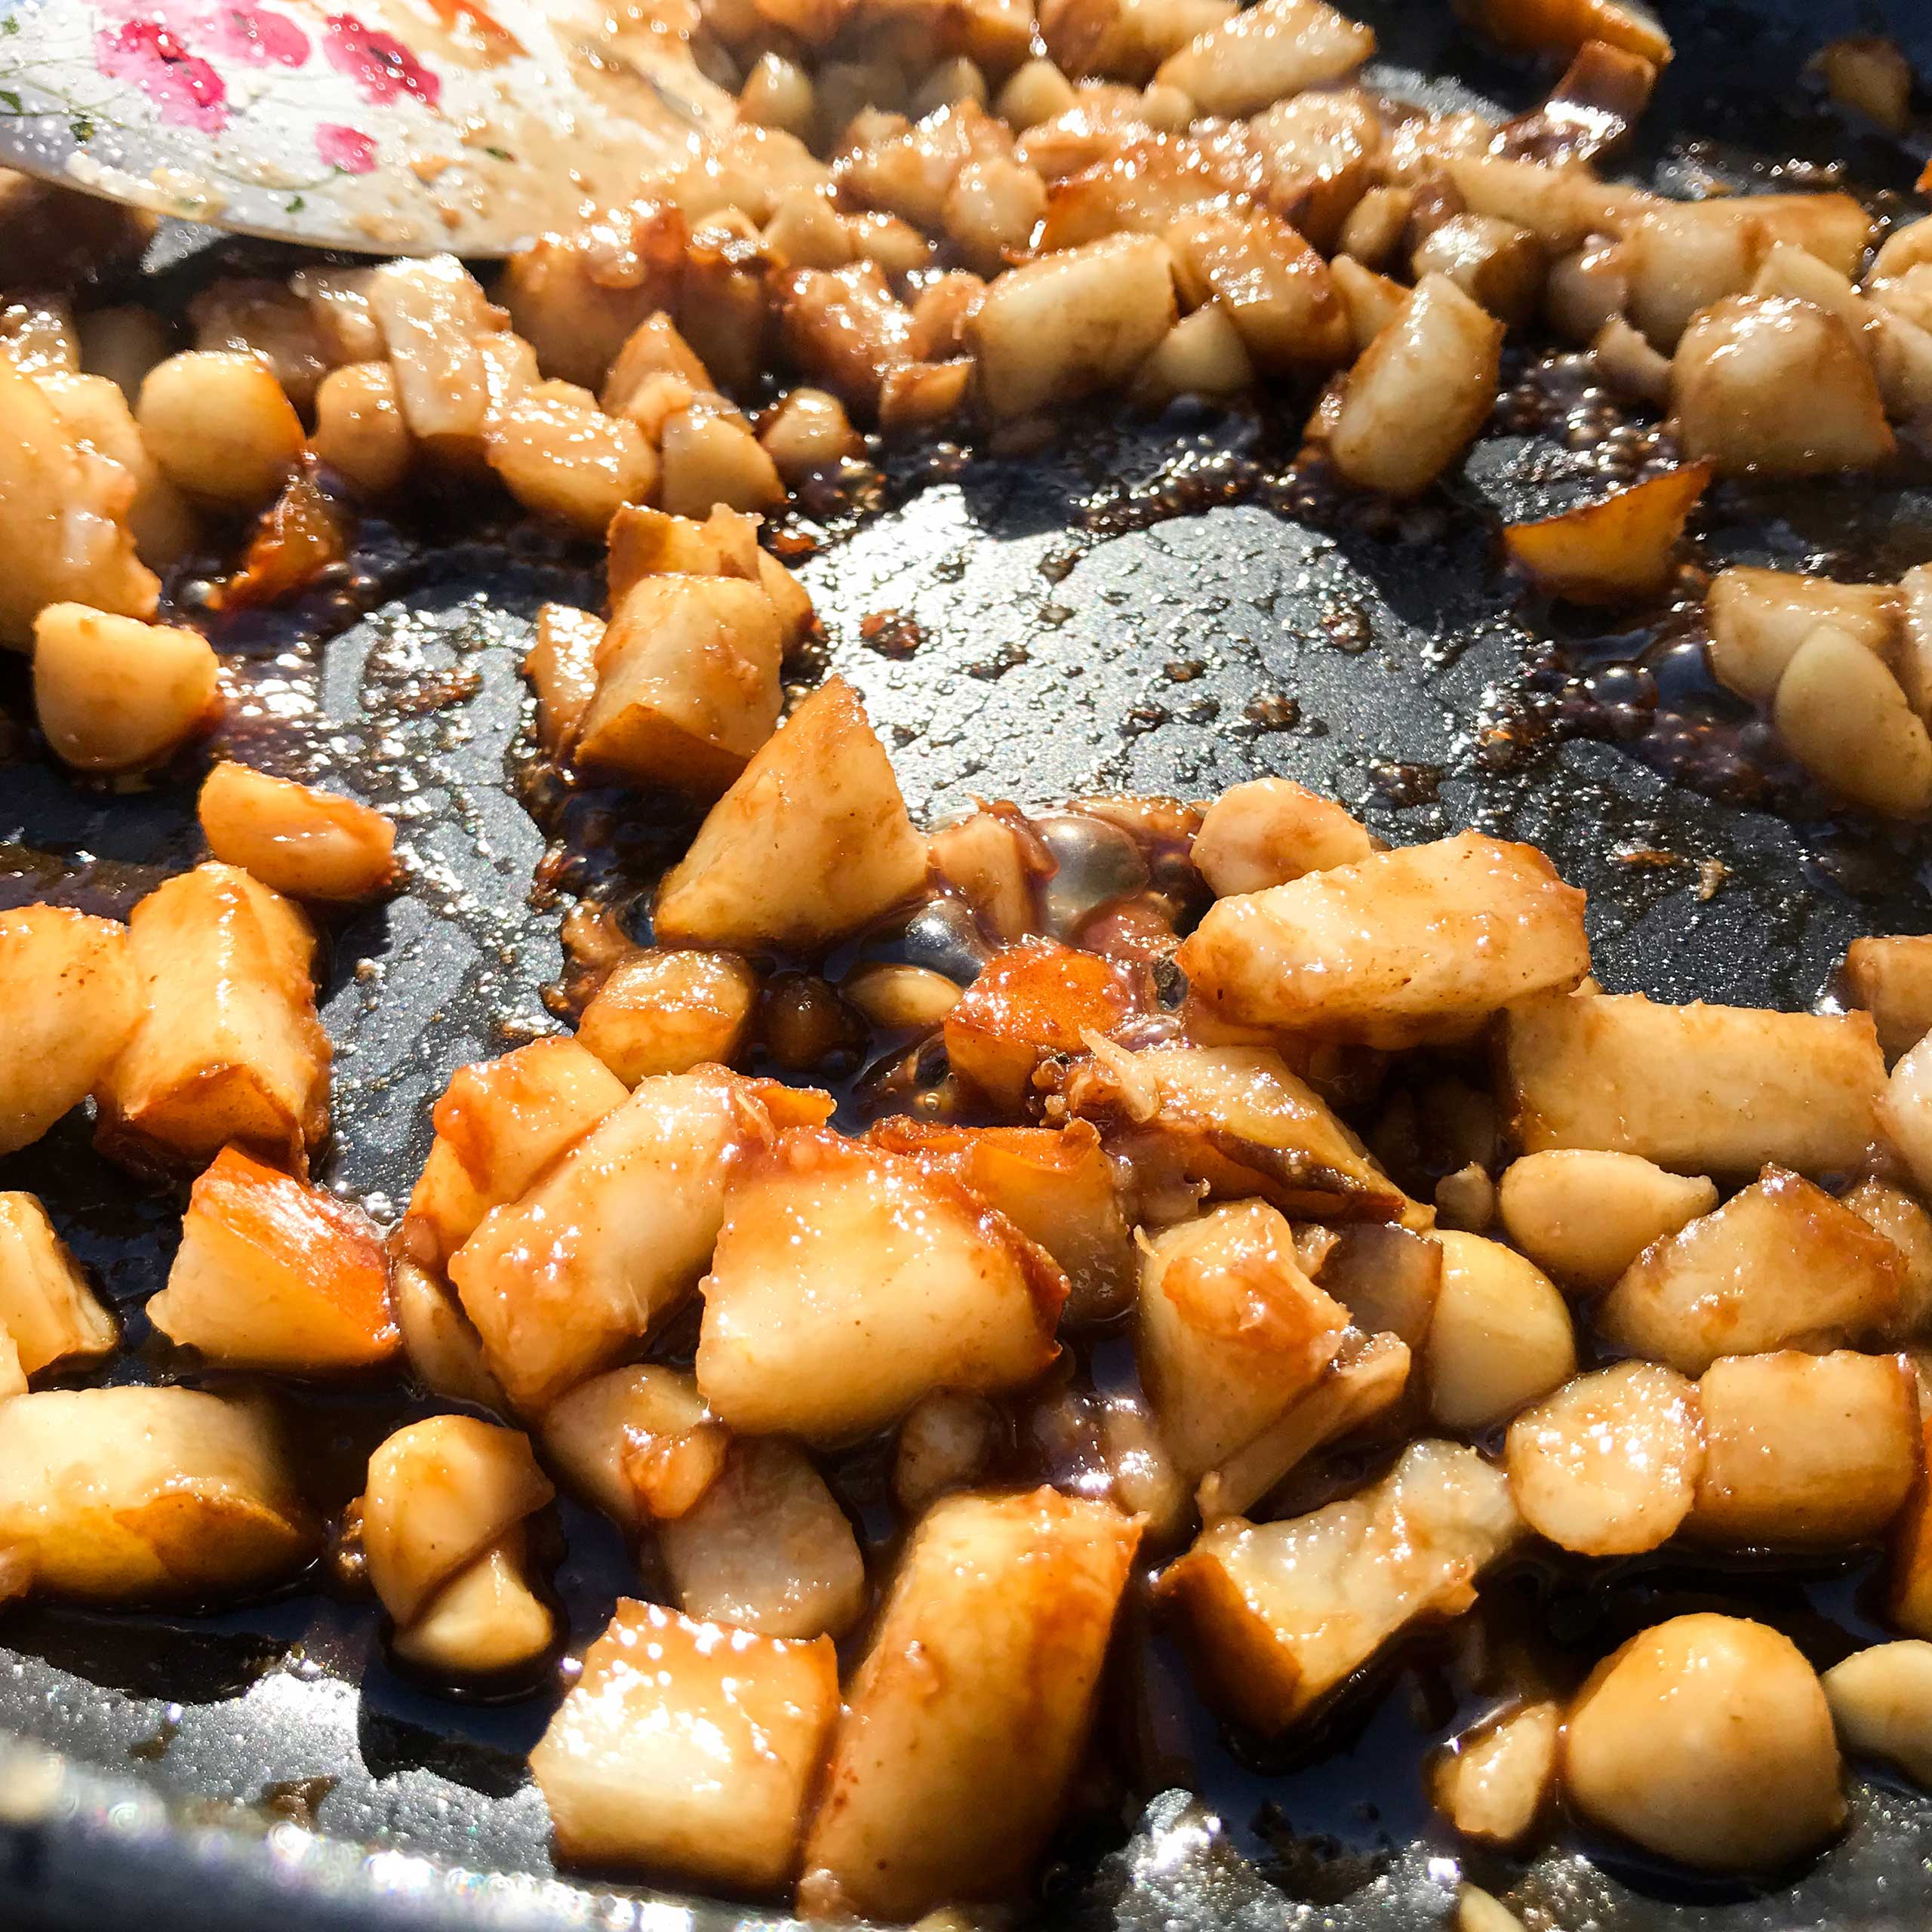 pears and macadamia nuts cooking in skillet.